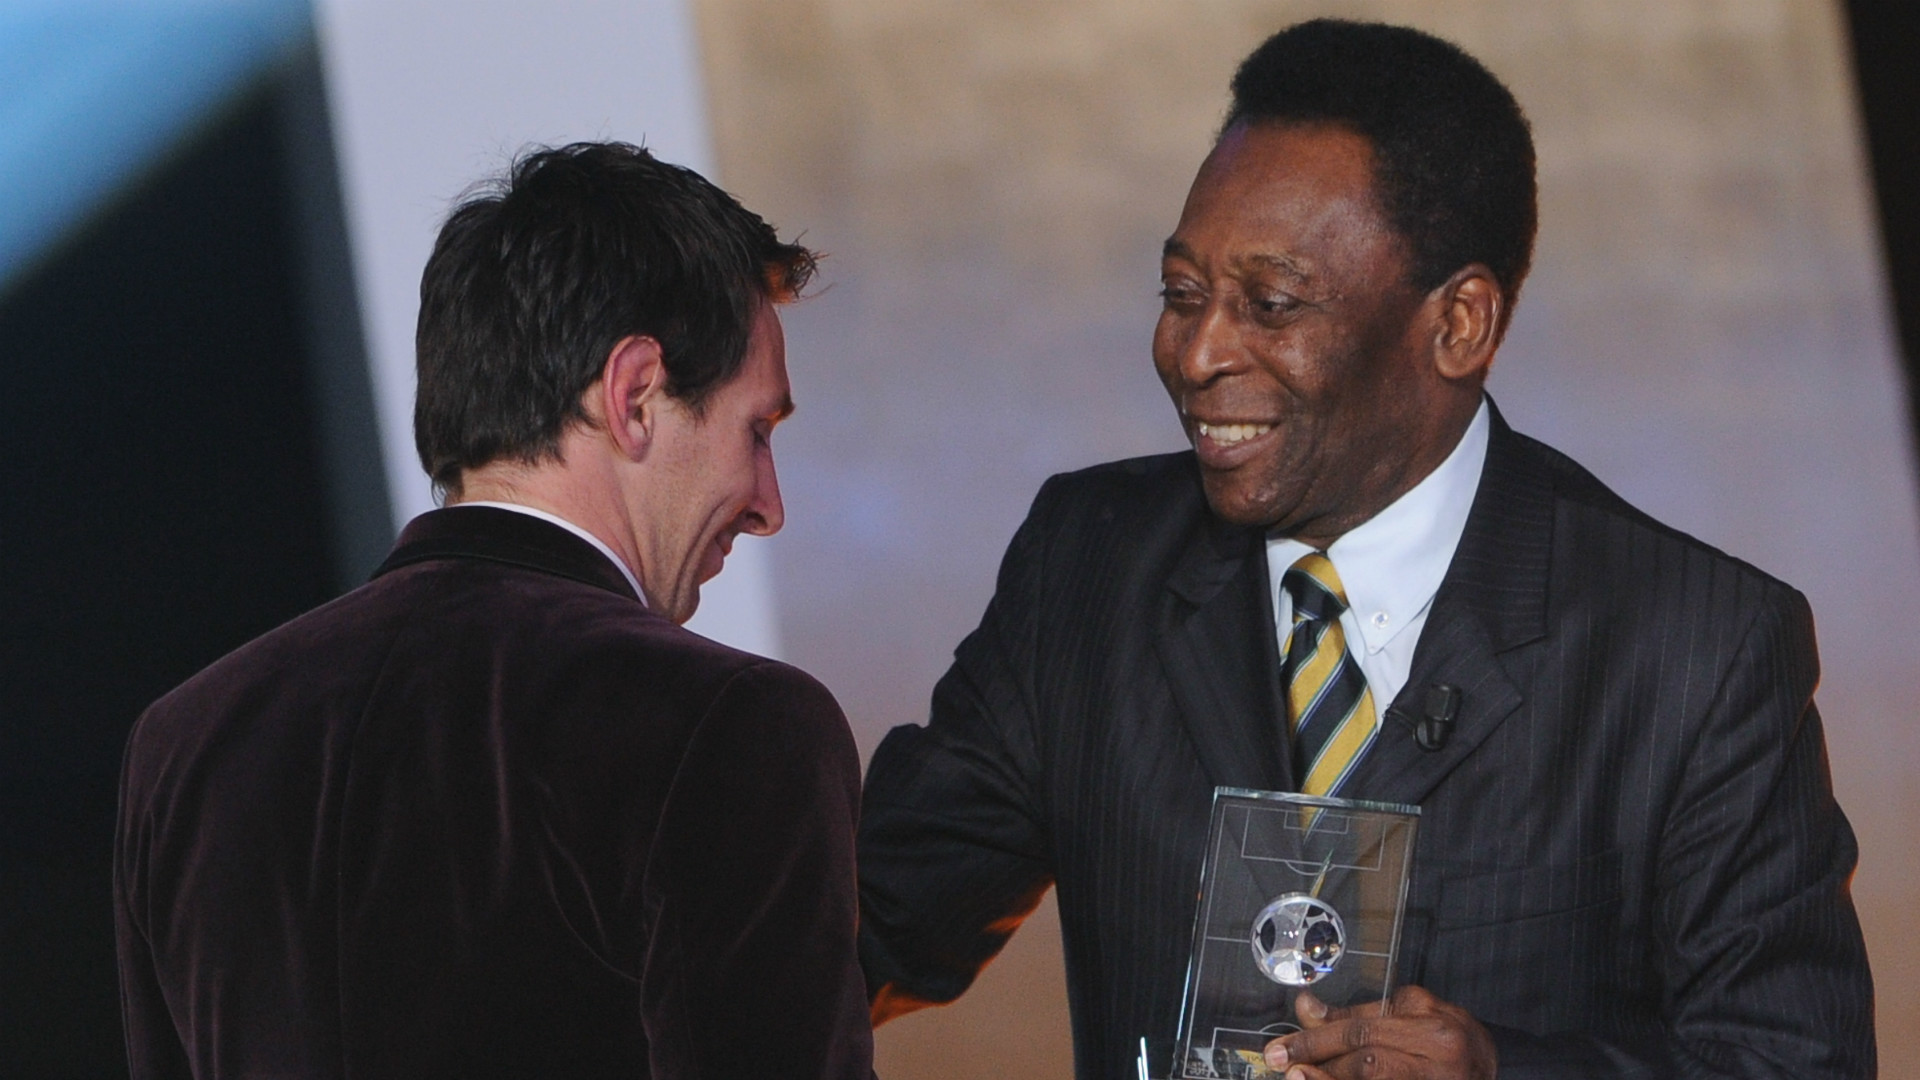 Lionel Messi to Pele - Who are the top 10 South American international goalscorers?